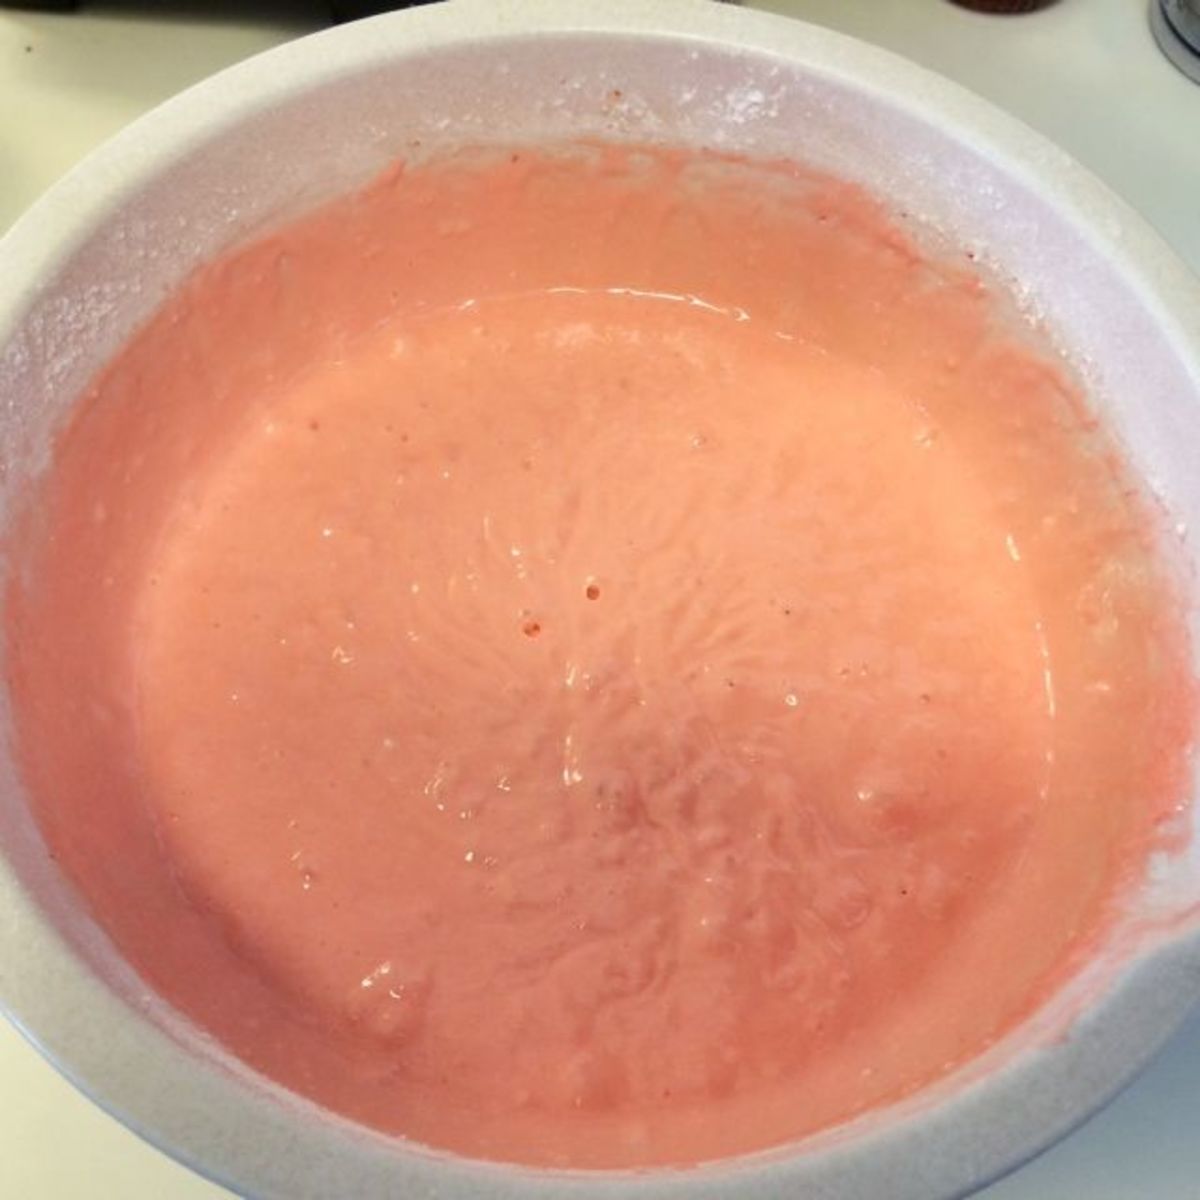 Cake batter after mixing should look like this.